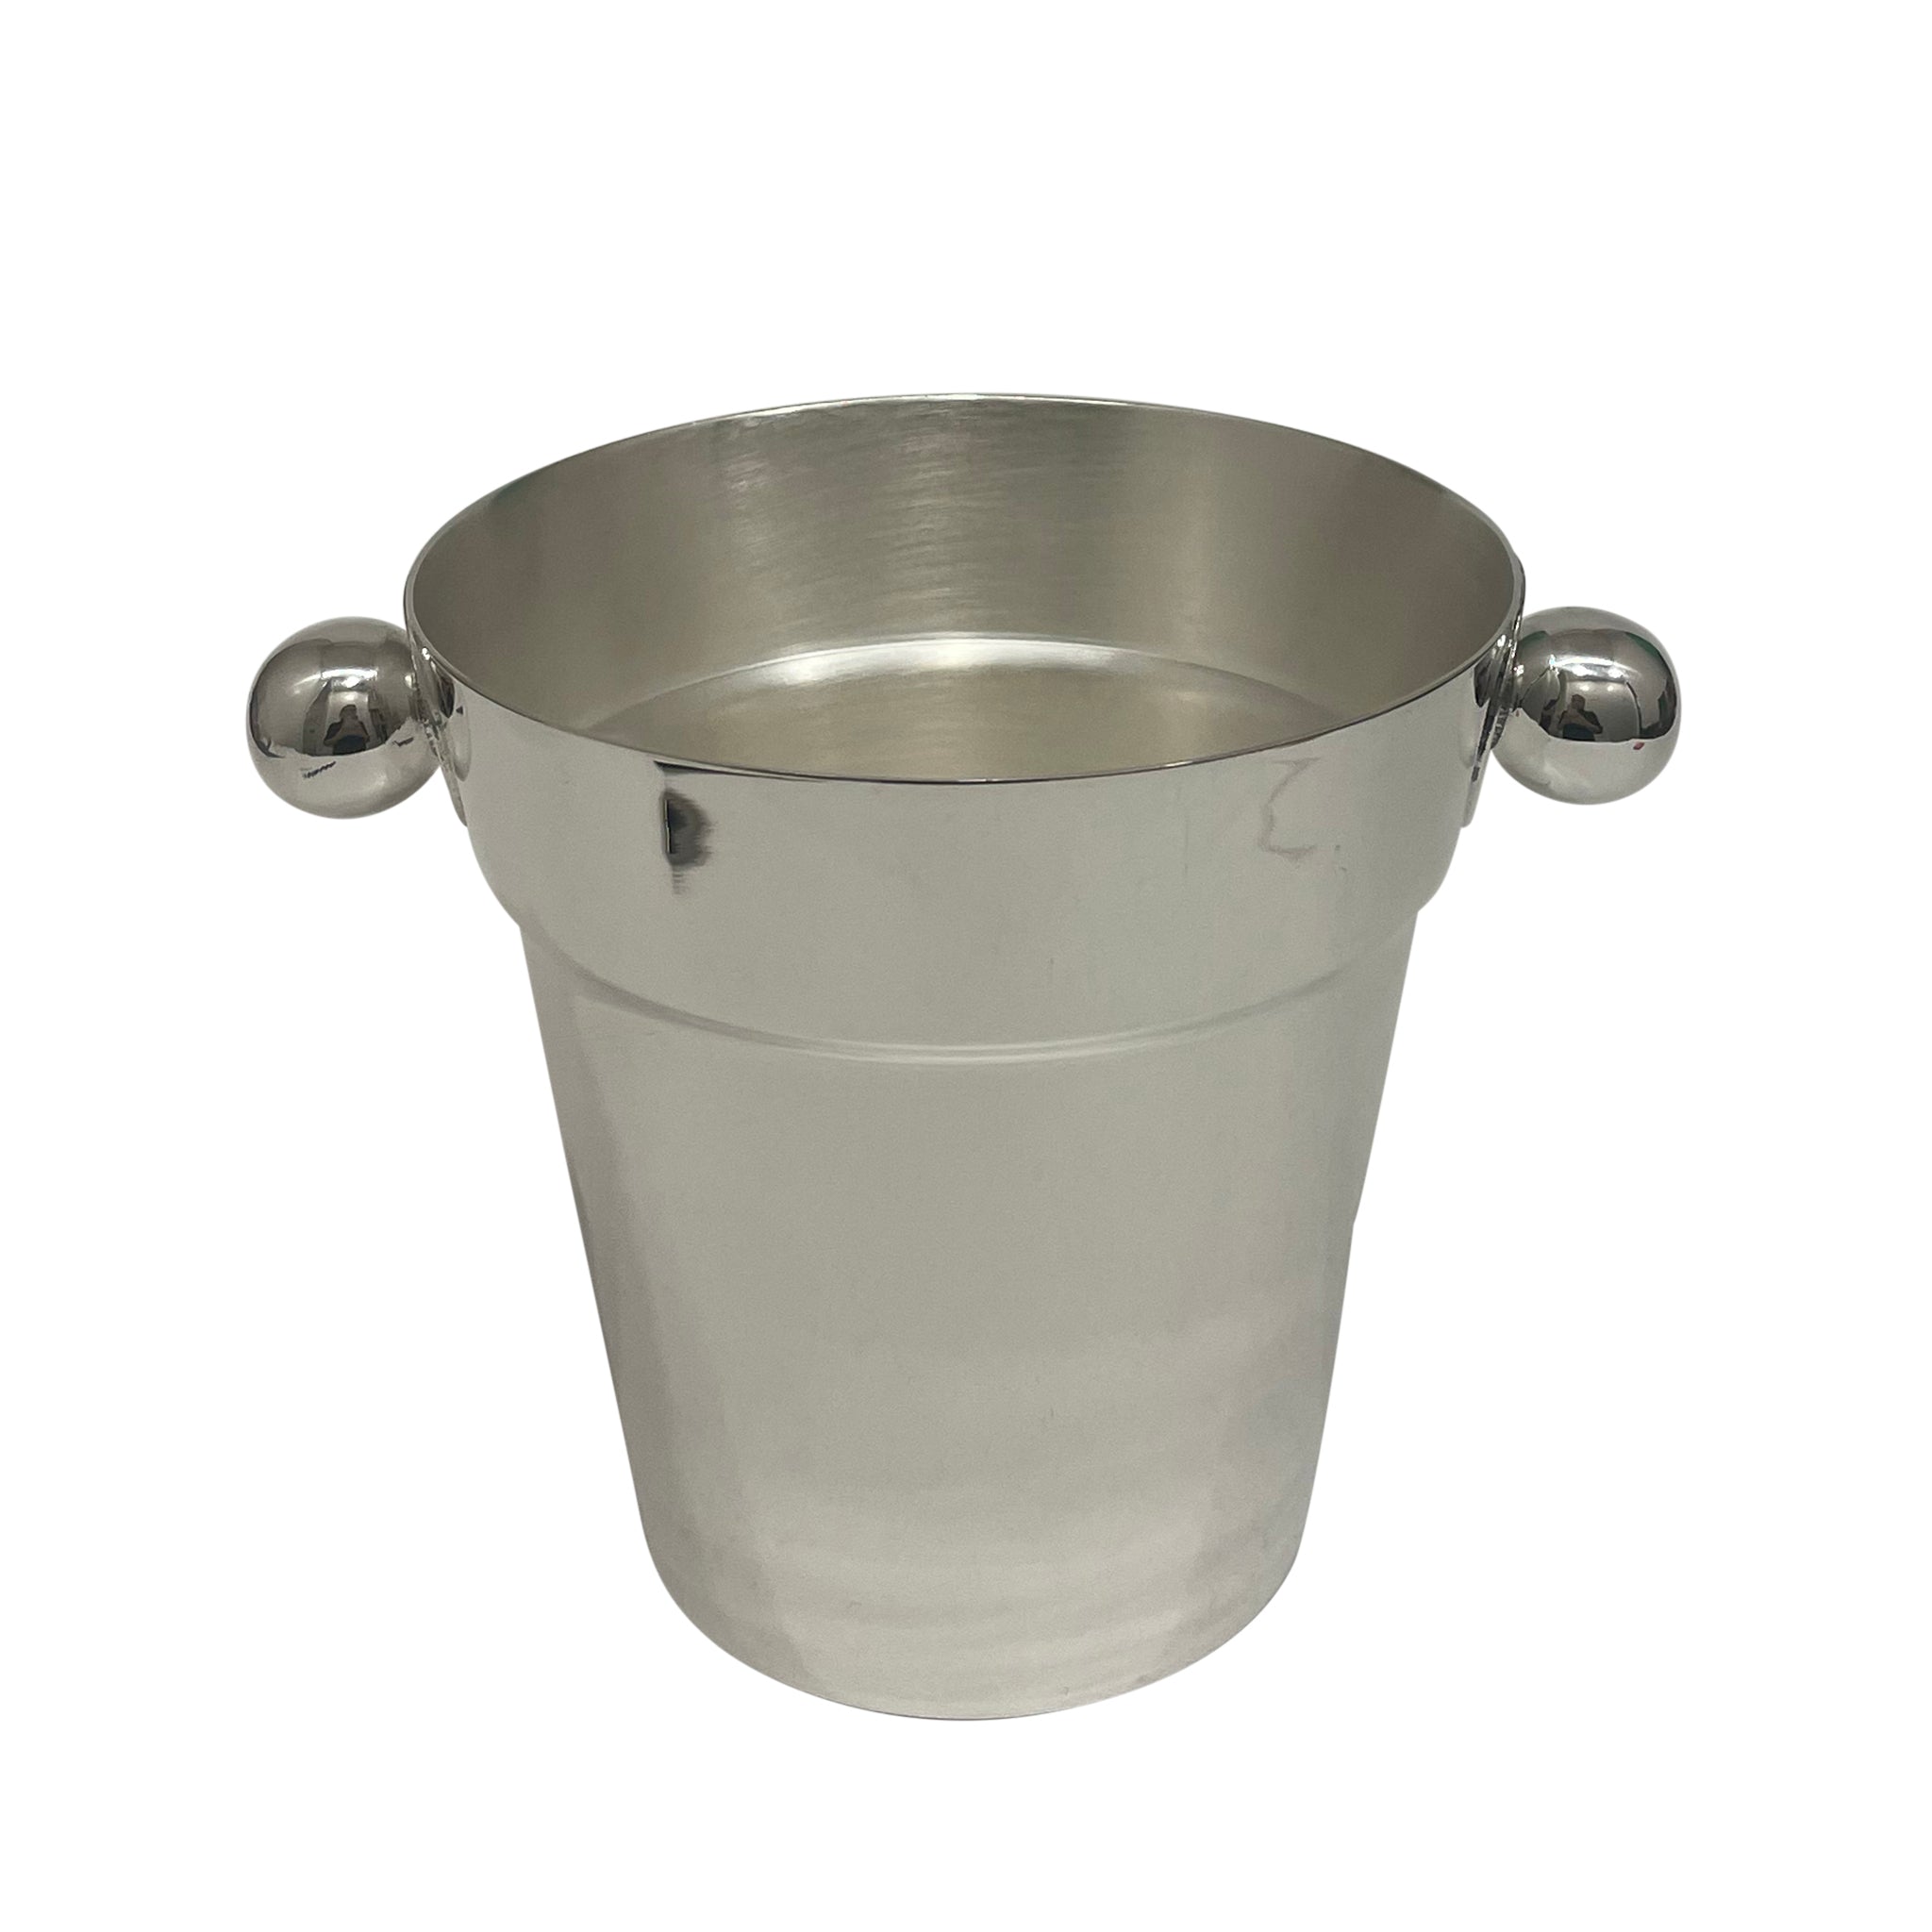 Vintage Cocktail Ice Bucket with Flower Pot Shape and Ball Handles